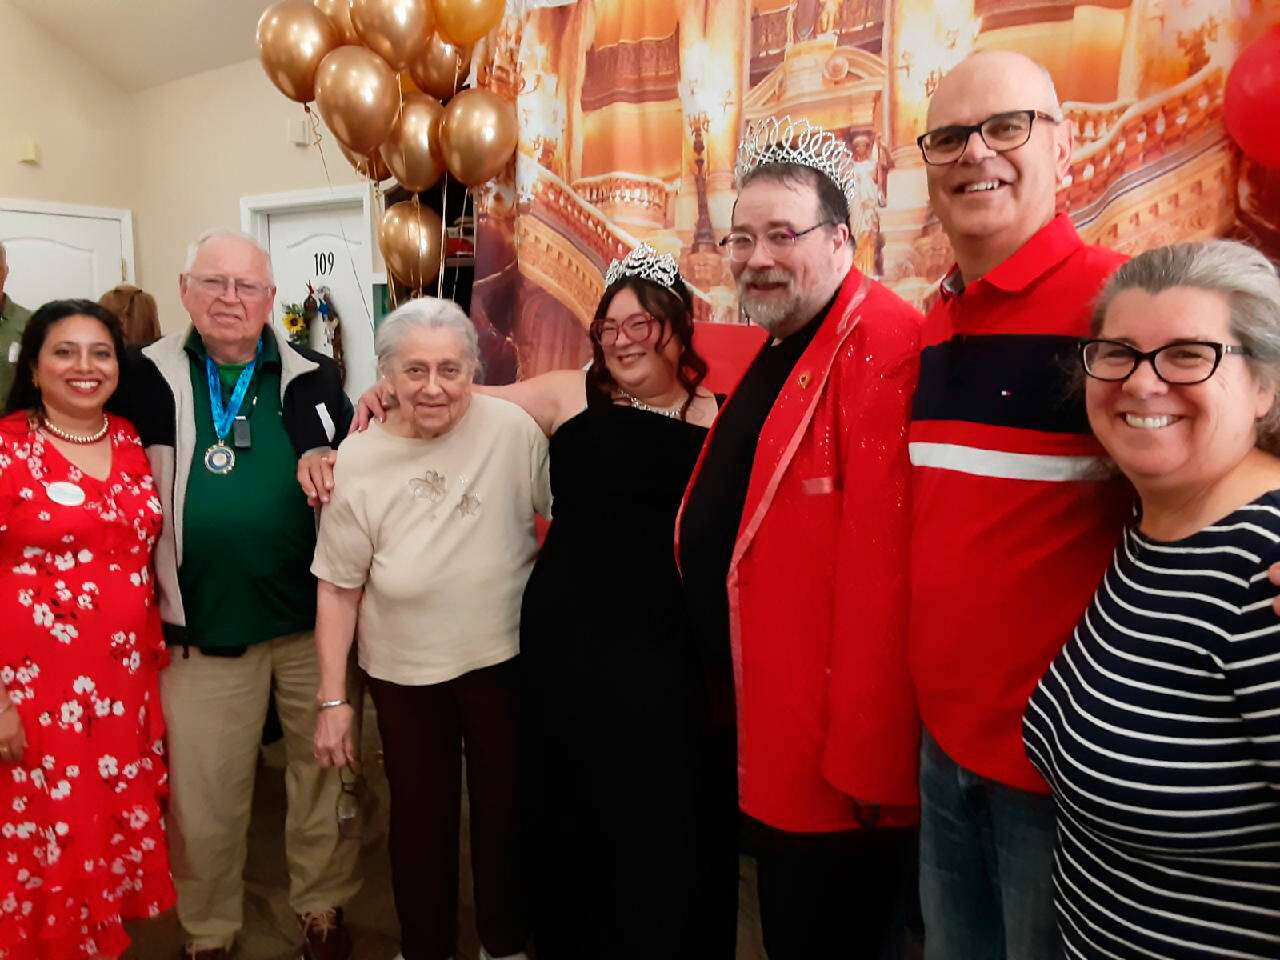 Ron Lenz, second from the left, with his wife Irene Lenz to the right of him, received the ‘Best Mentor’ award and is surrounded by family June 15 at the Aegis Living Kent’s annual A‘DAD’emy Awards to honor fathers. COURTESY PHOTO, Aegis Living Kent